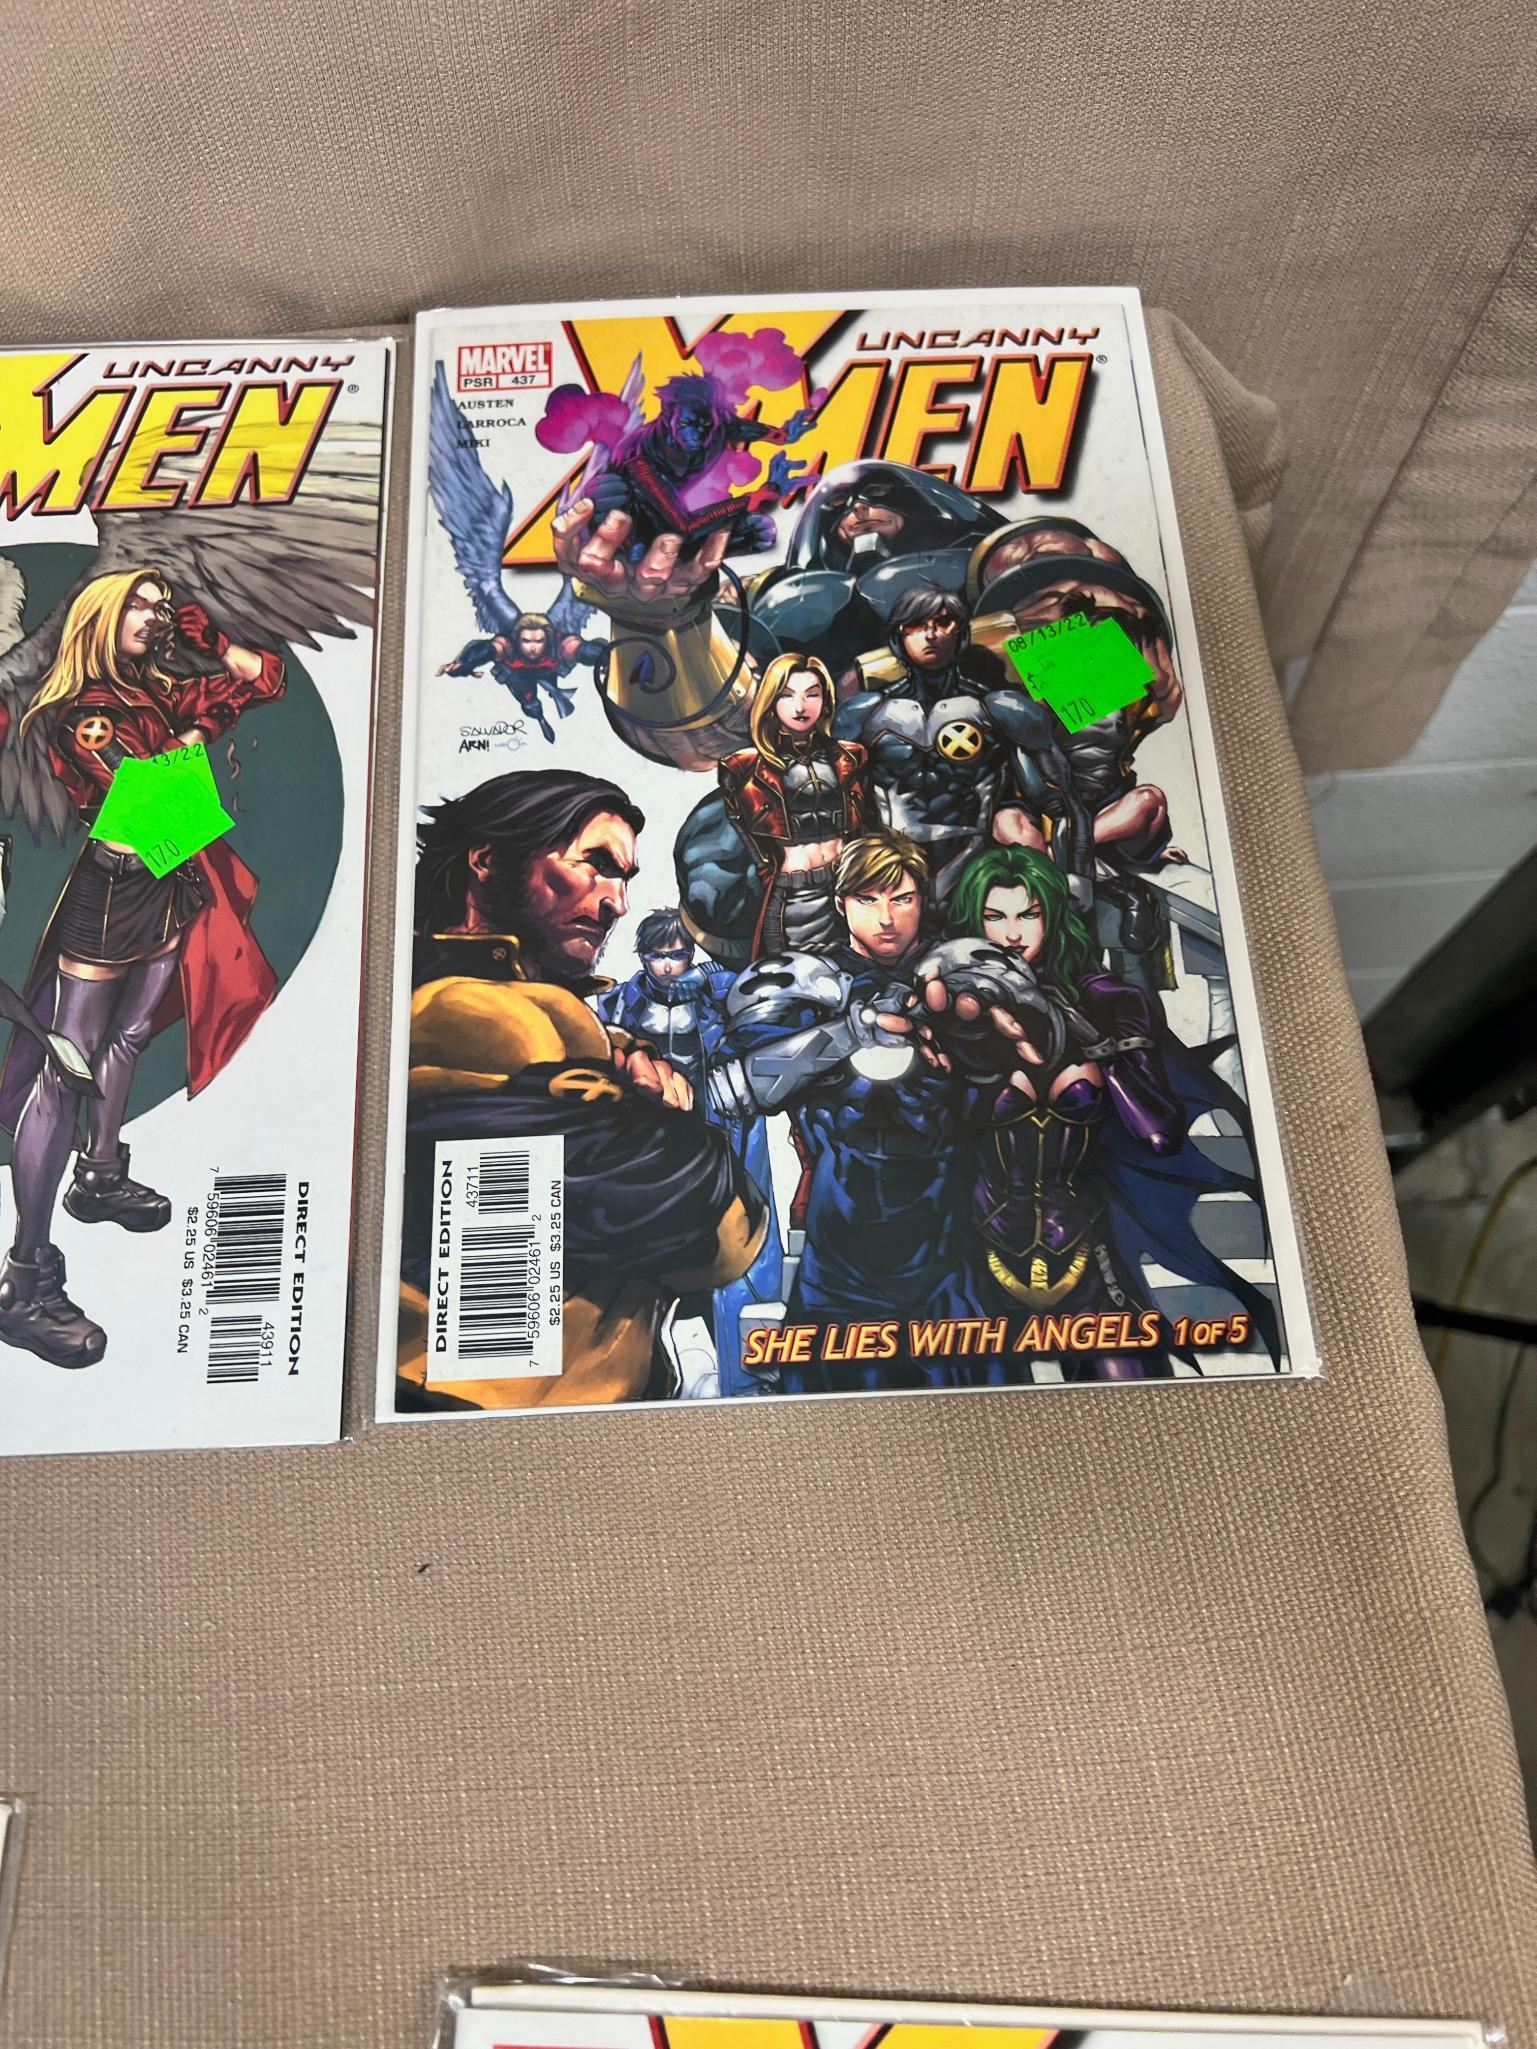 20+ Uncanny X-Men and related Comic Books issues 437-455, some dups, some gaps, see pics